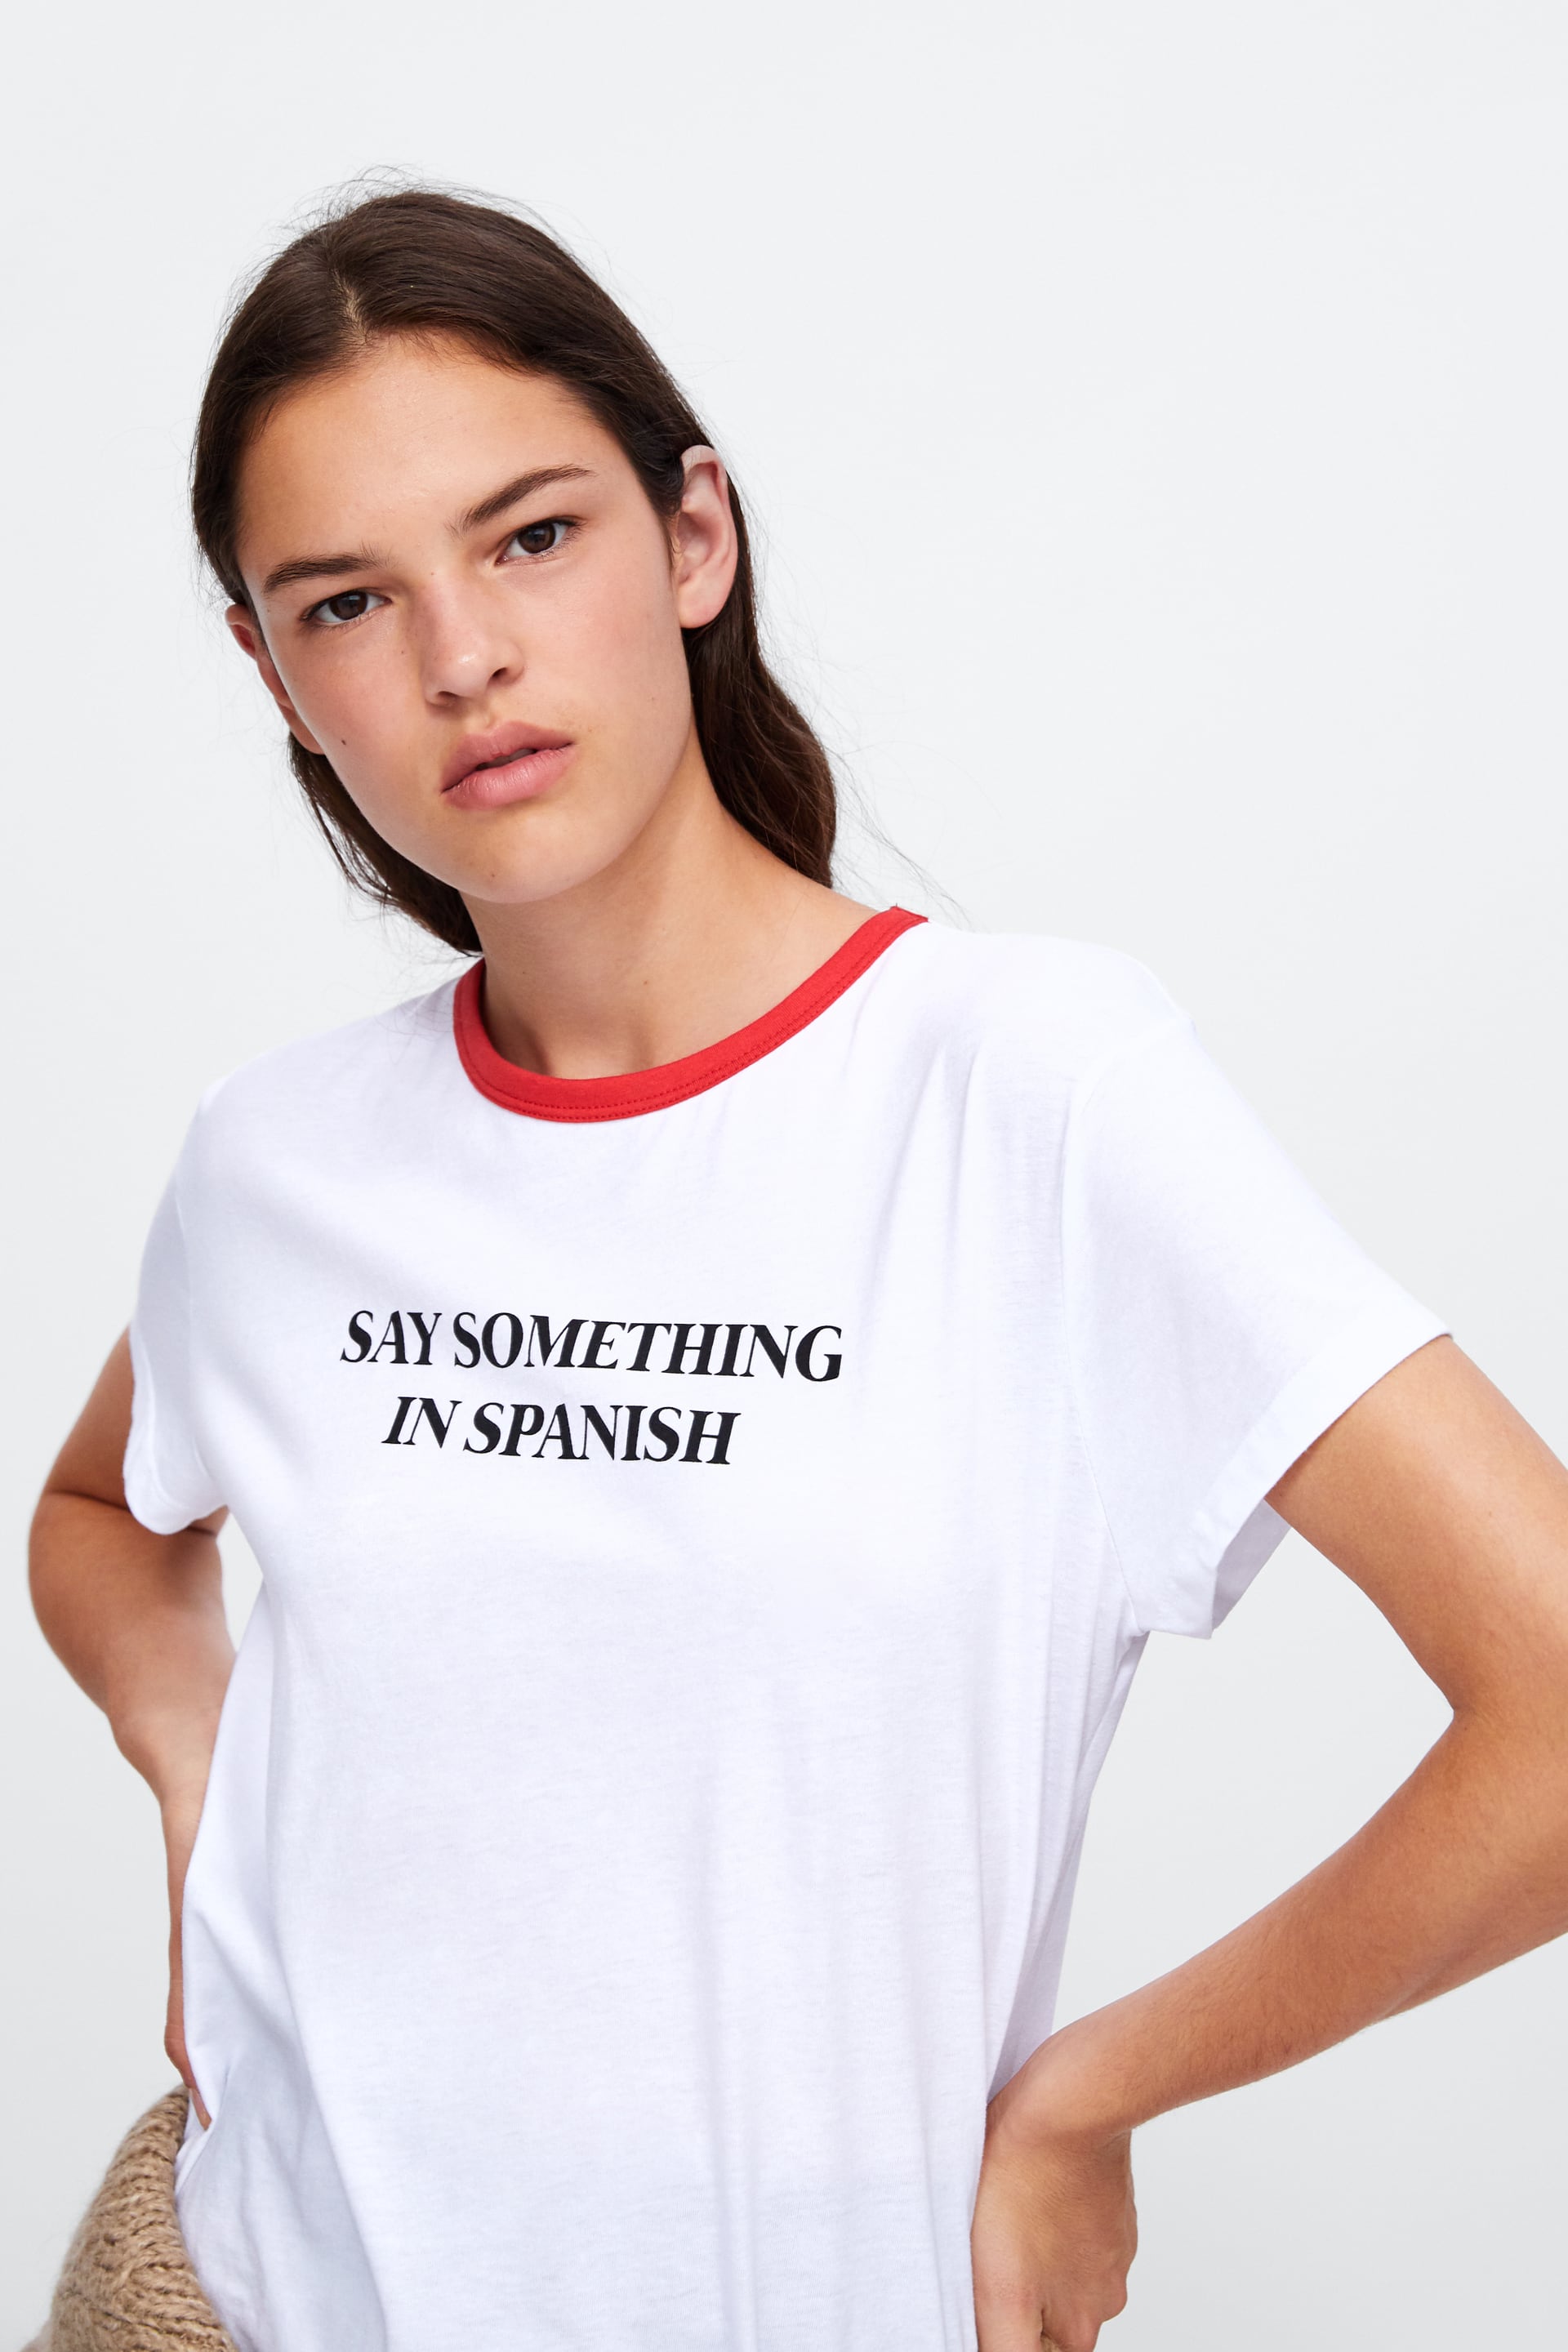 Zara T-SHIRT WITH FRONT SLOGAN at £7.99 | love the brands